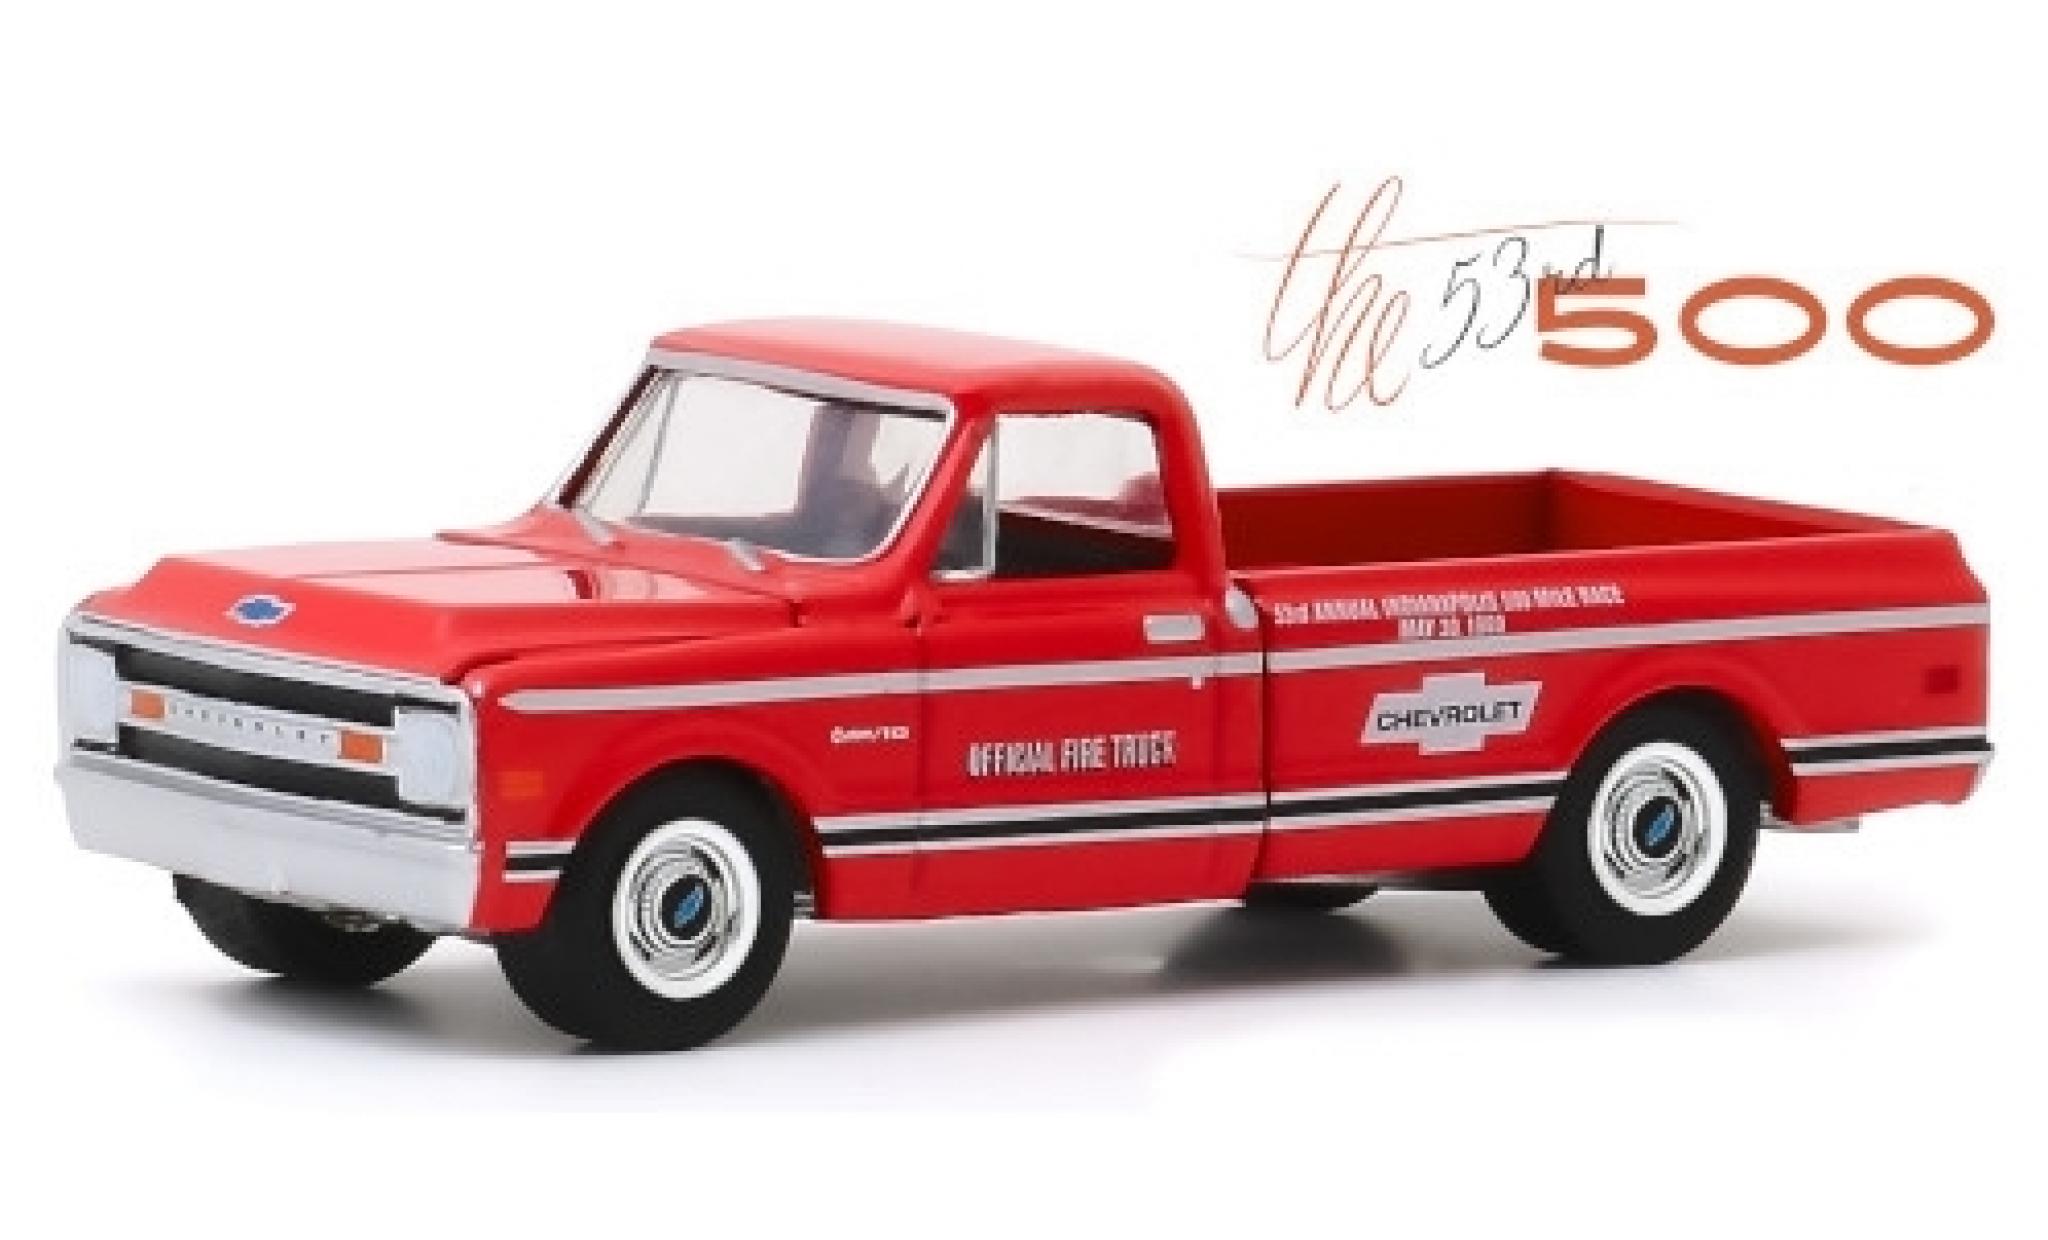 Chevrolet C-10 1/64 Greenlight rouge/Dekor Official Fire Truck 1969 53rd Annual Indianapolis 500 Mile Race